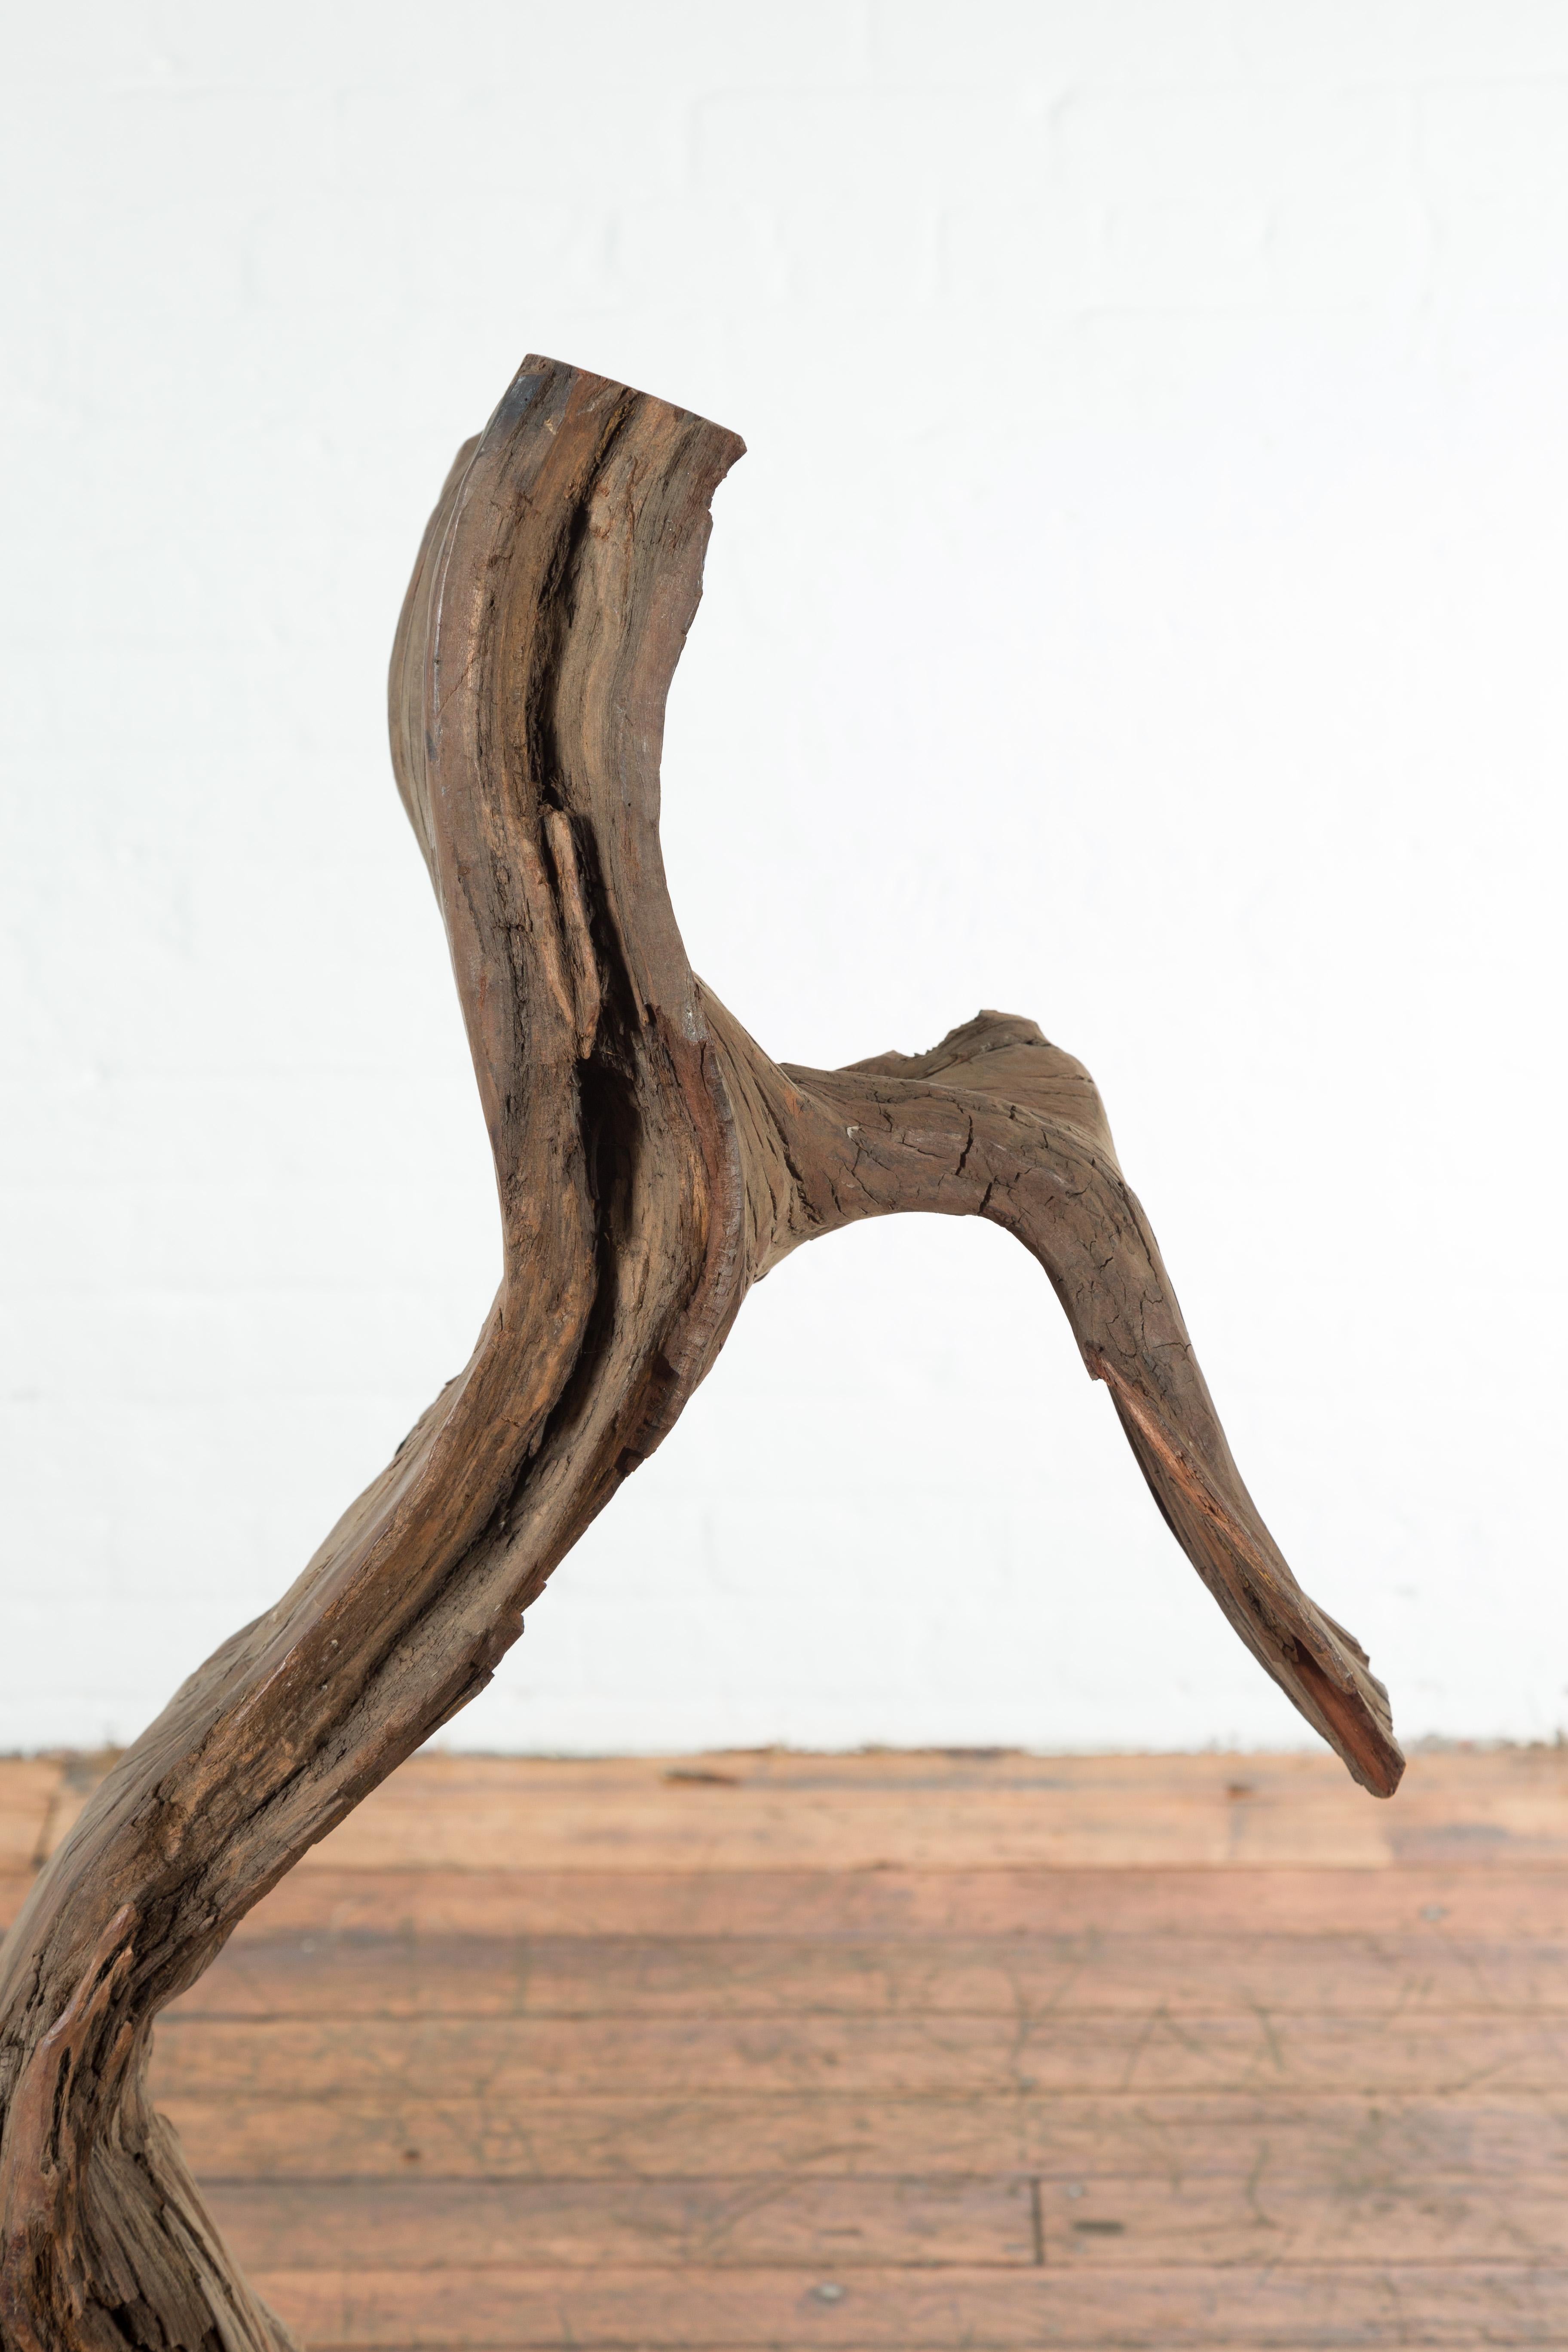 An antique Indonesian river wood fragment that could be used as a sculpture or decorative bench. This charismatic tree carving was found close to a river and presents a tall and narrow, rustic Silhouette. Perfect to be placed in a modern decor where